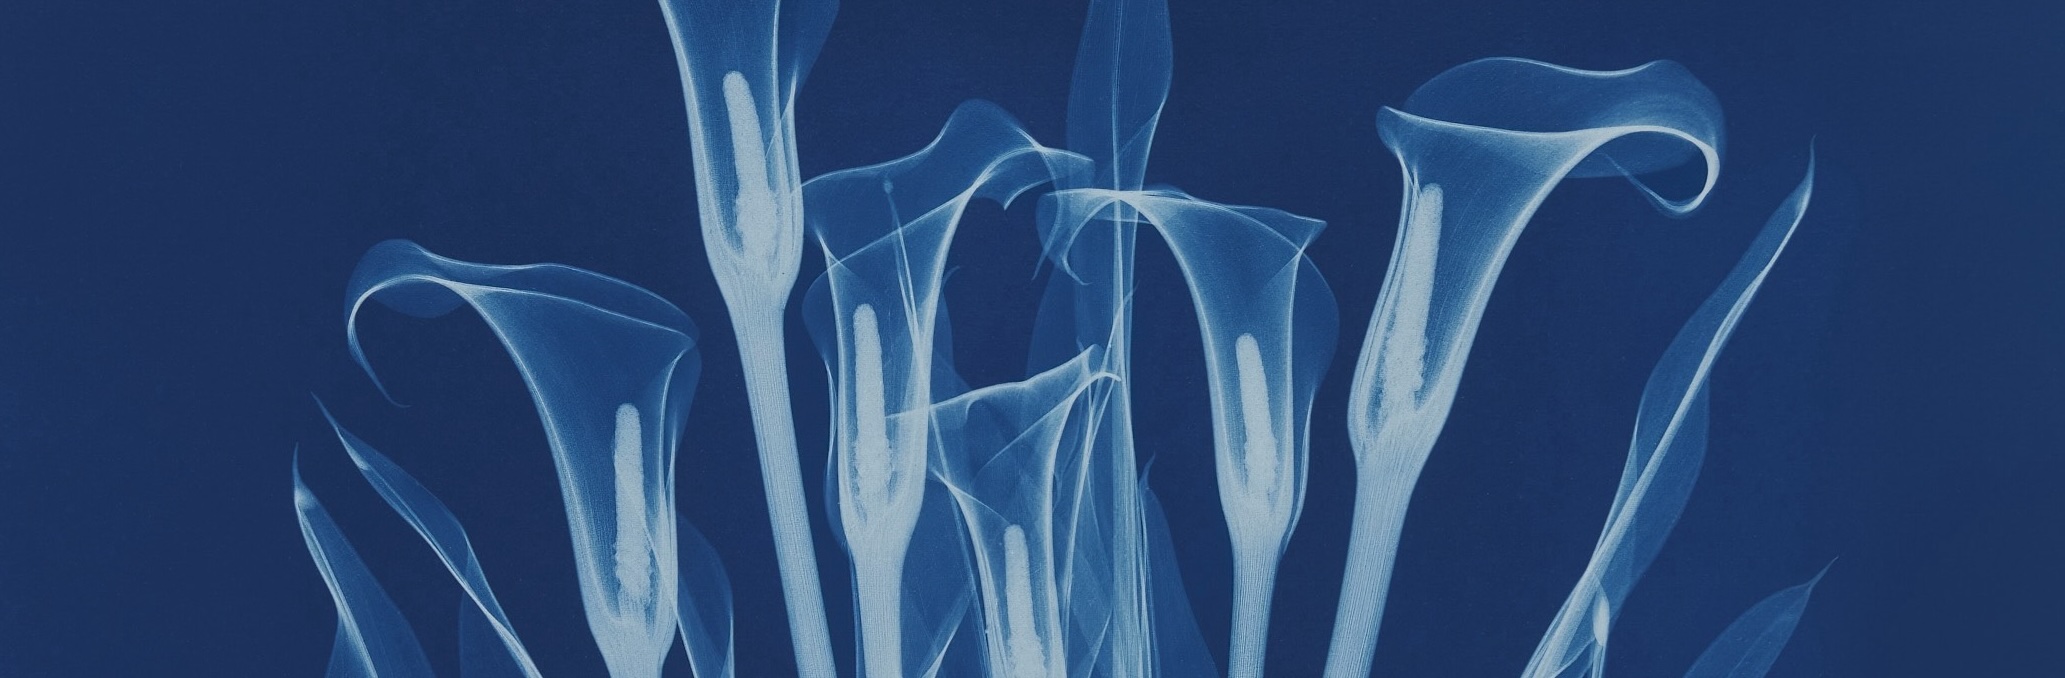 A Flower Through X-ray eyes_Bryan Whitney©2024_journal of wild culture